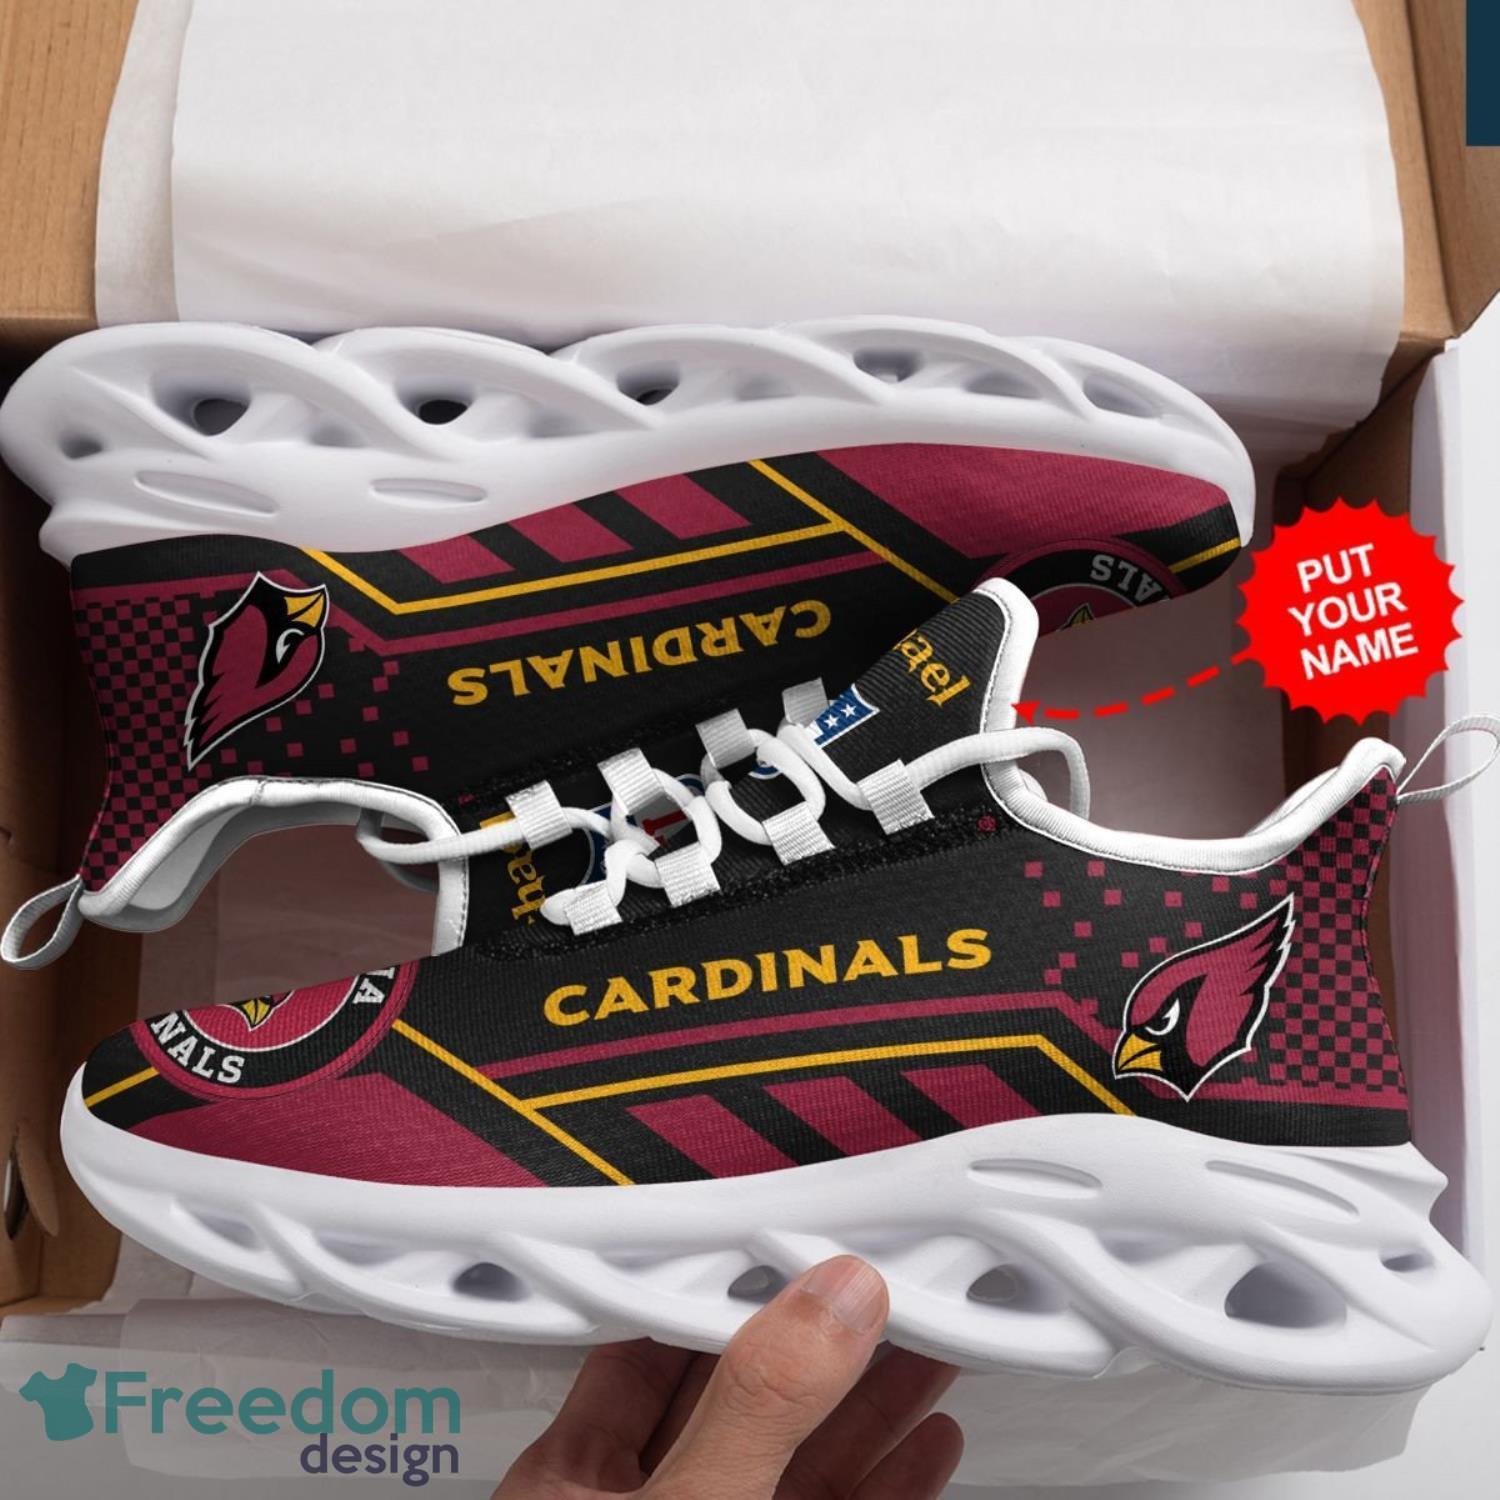 St. Louis Cardinals Style 1 Design Sneakers Yeezy Shoes For Men